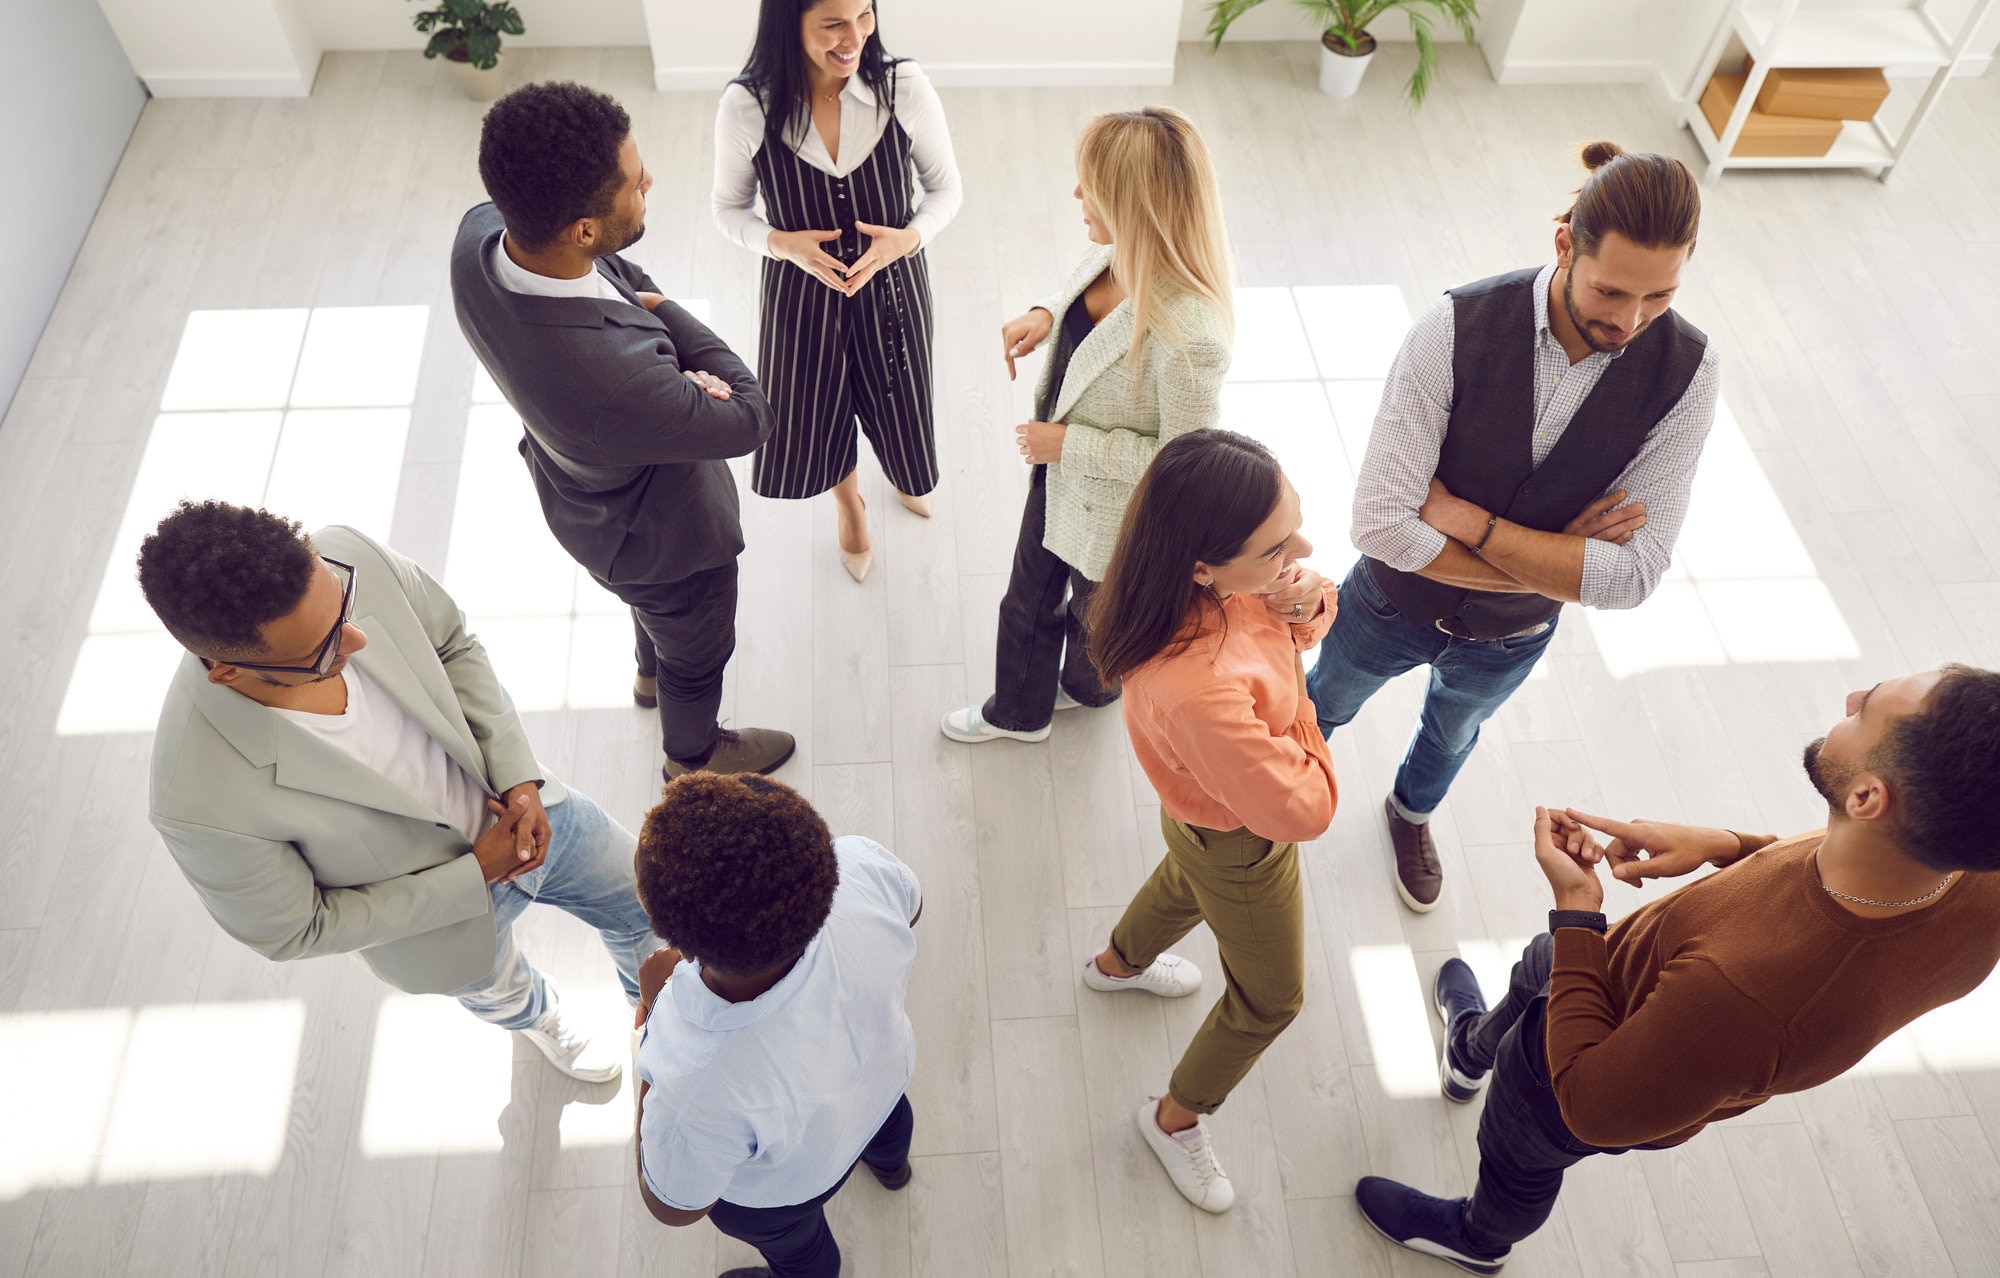 Group of diverse people communicating at business event